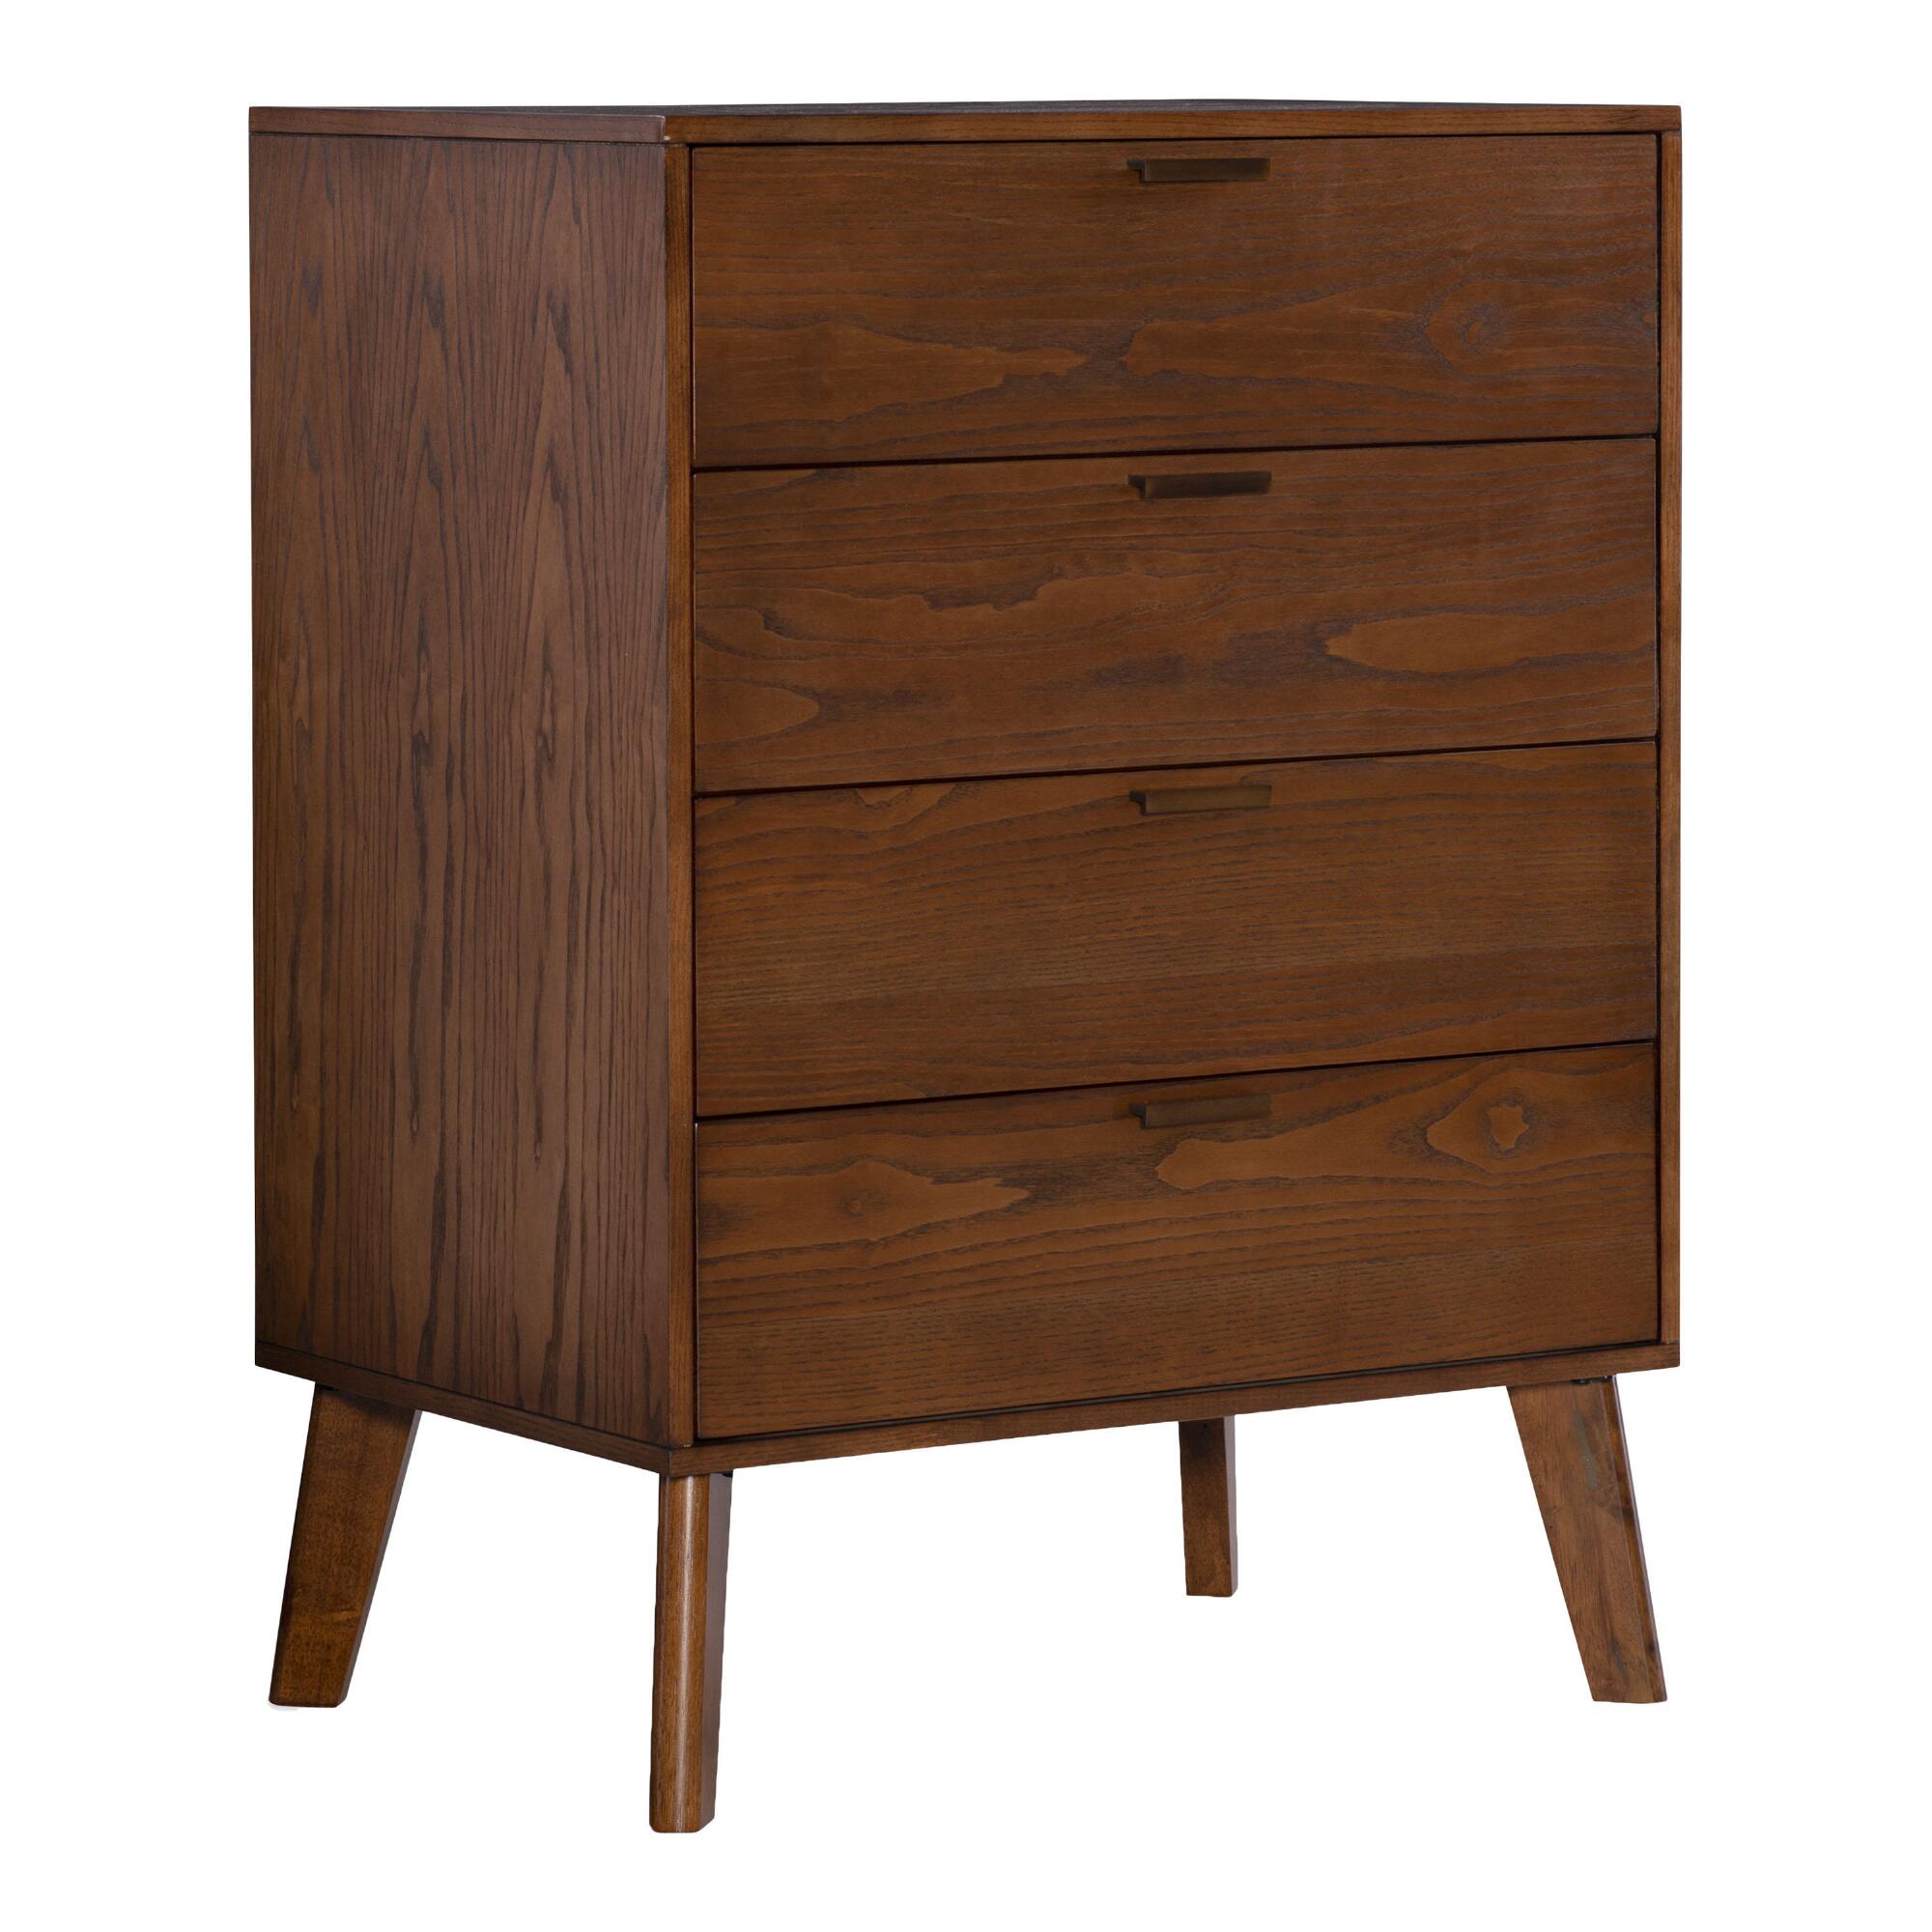 Walnut Mid Century Jackson Chest of Drawers: Brown by World Market